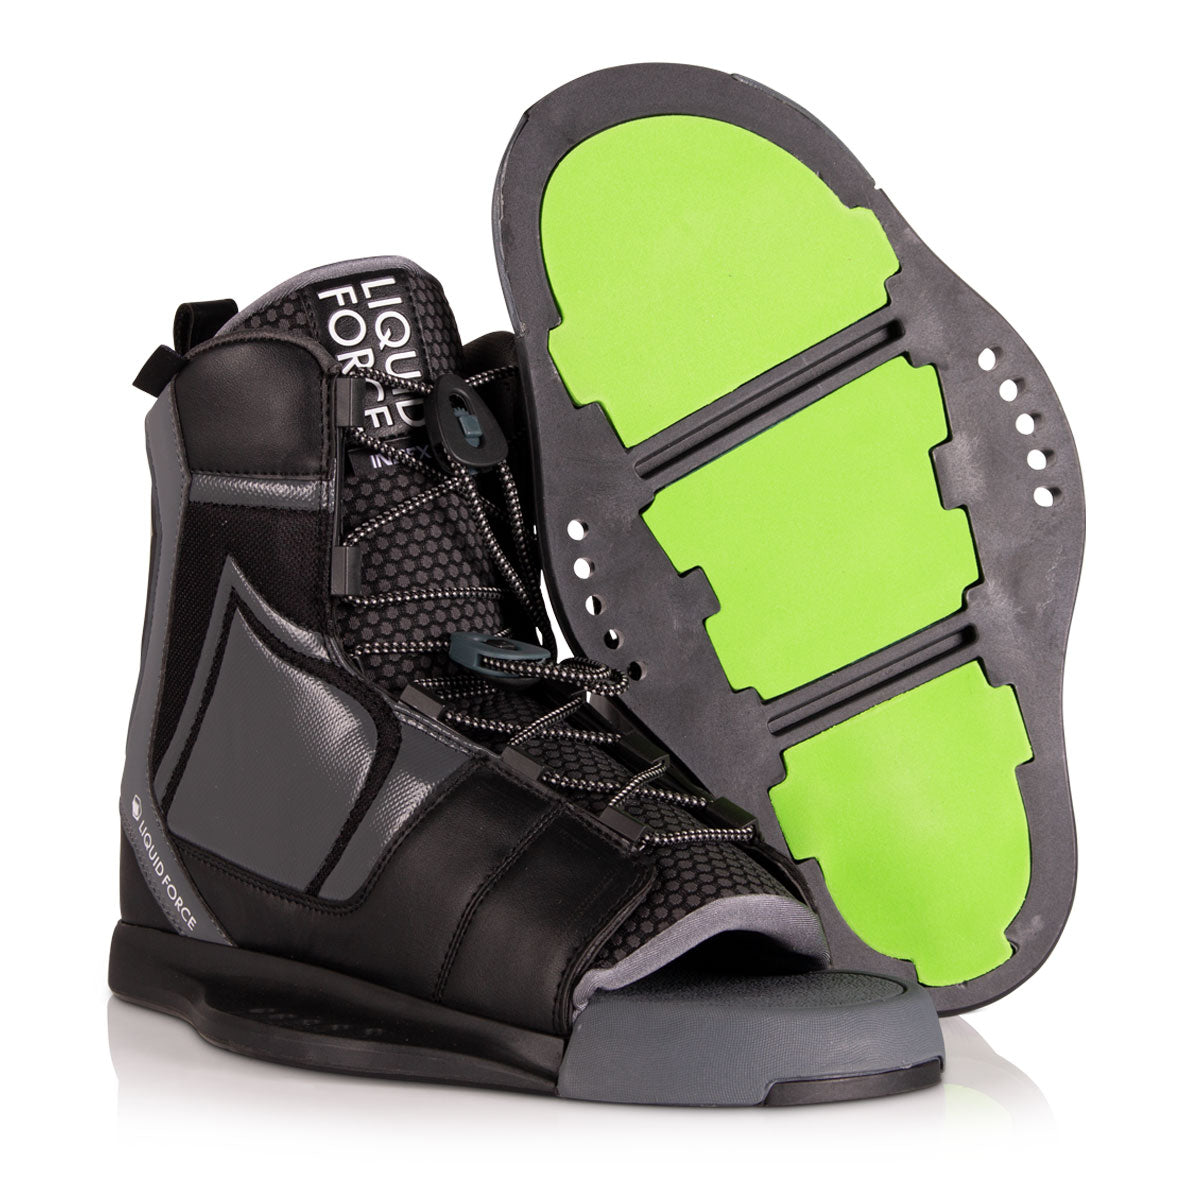 A pair of 2021 Liquid Force Index Bindings designed for riding, offering comfort and featuring a binding system.